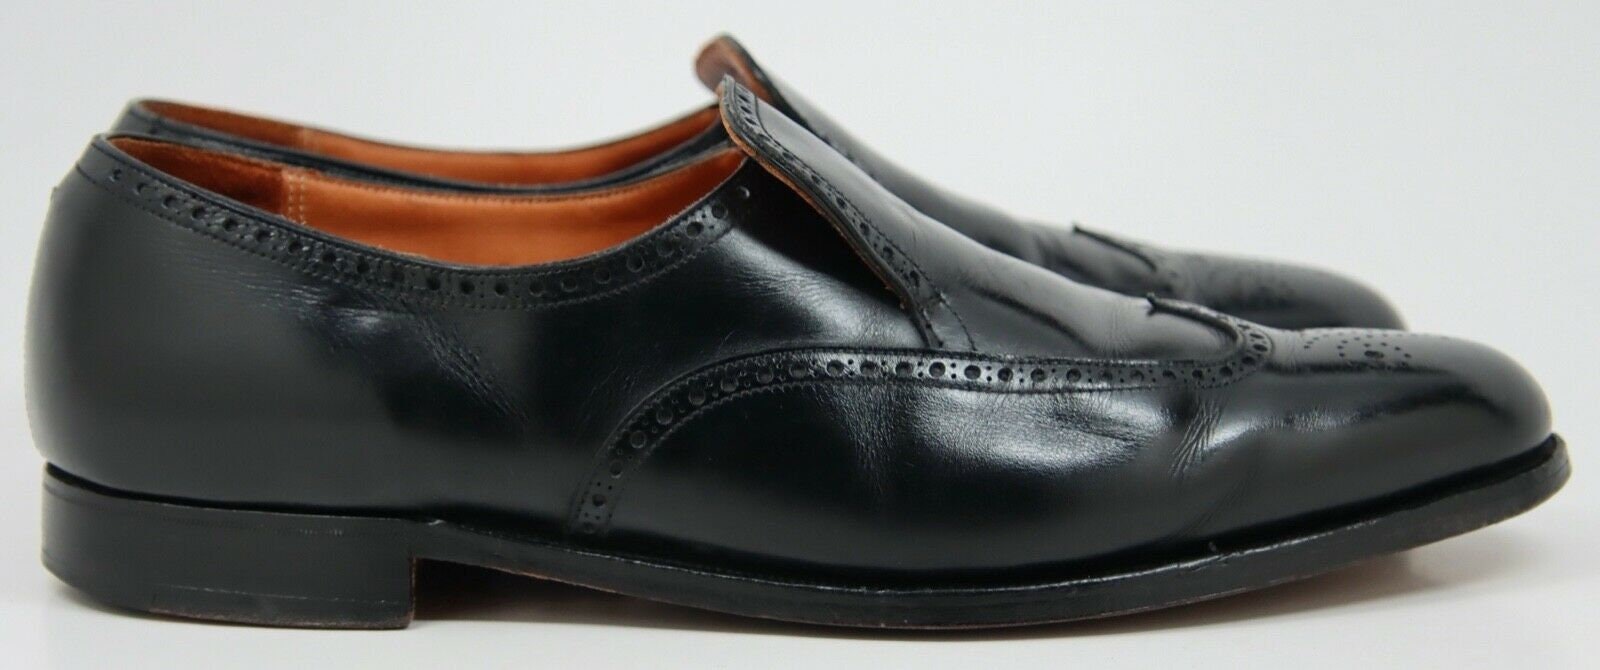 Brooks Brothers PEAL & CO Slip on WINGTIP Black Leather Shoes - Etsy